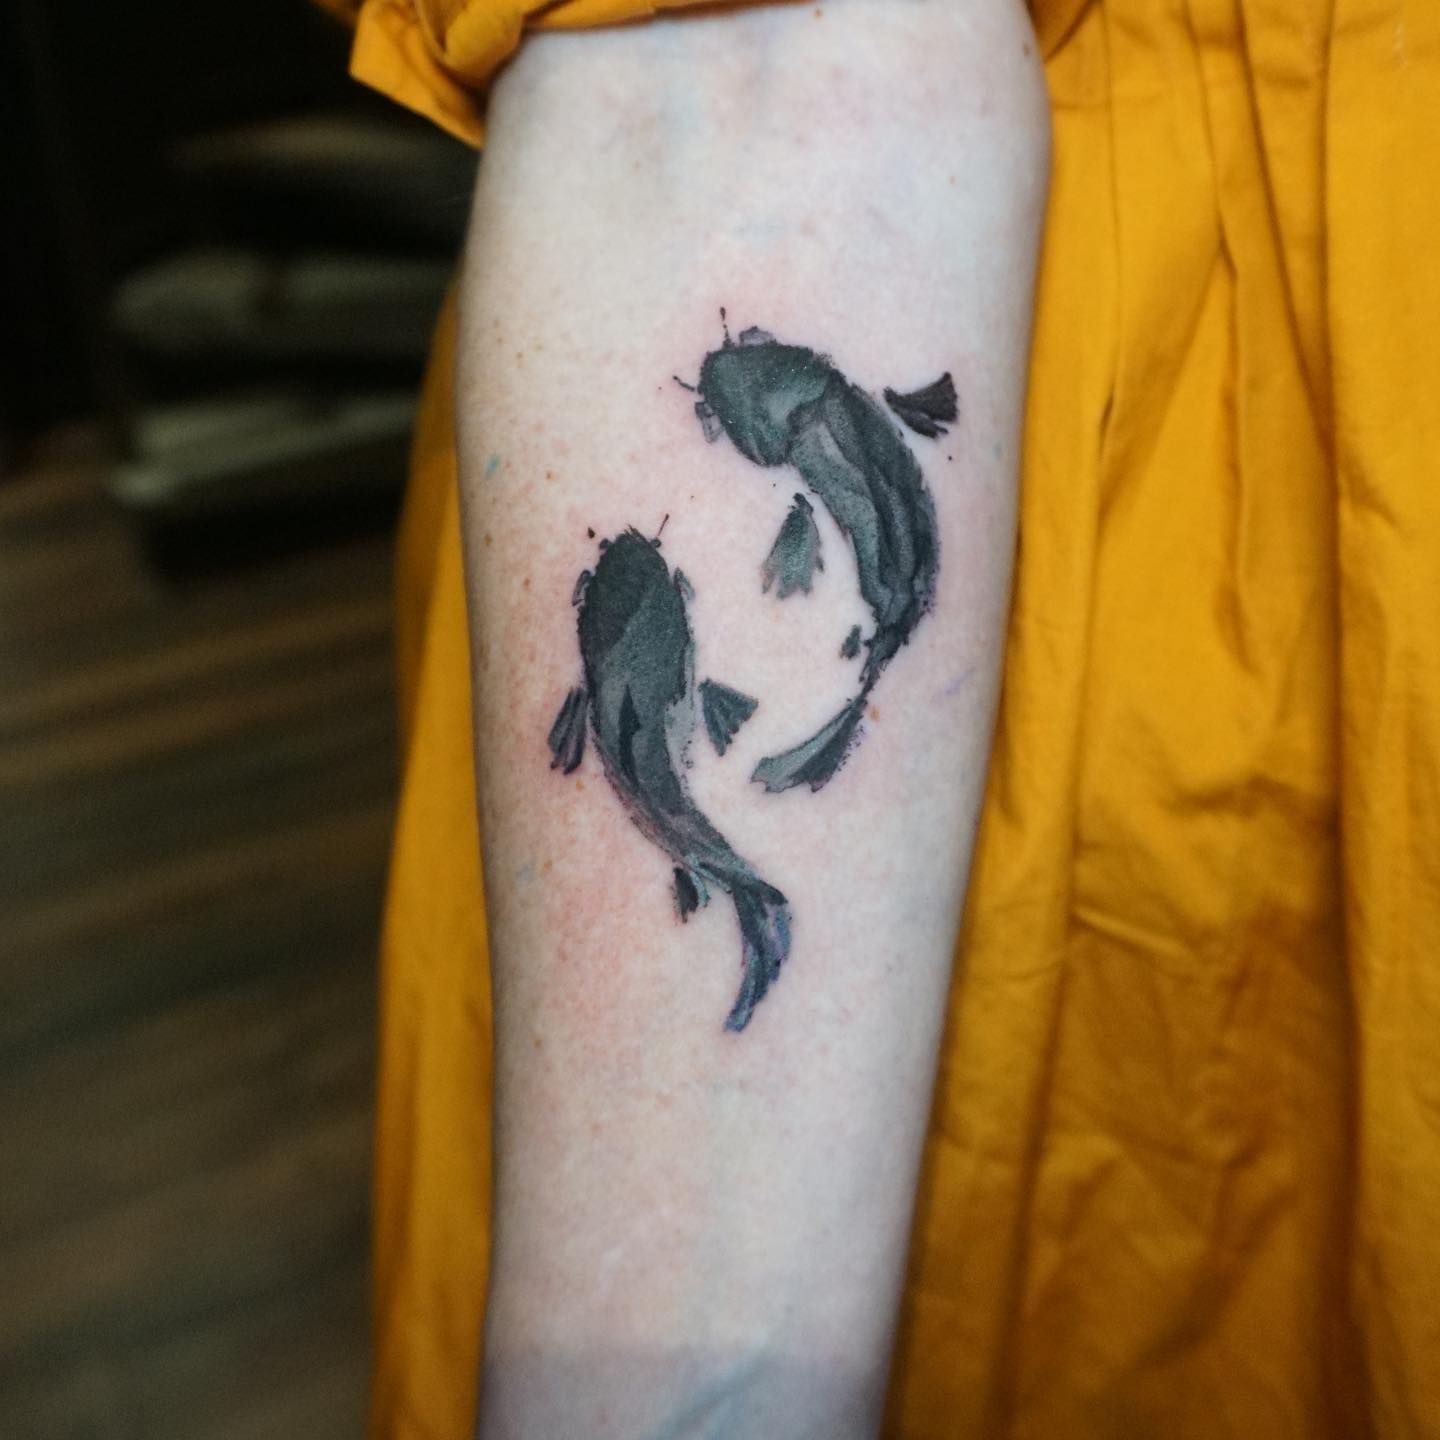 The true meaning of koi fish and lotus flower tattoo  1984 Studio